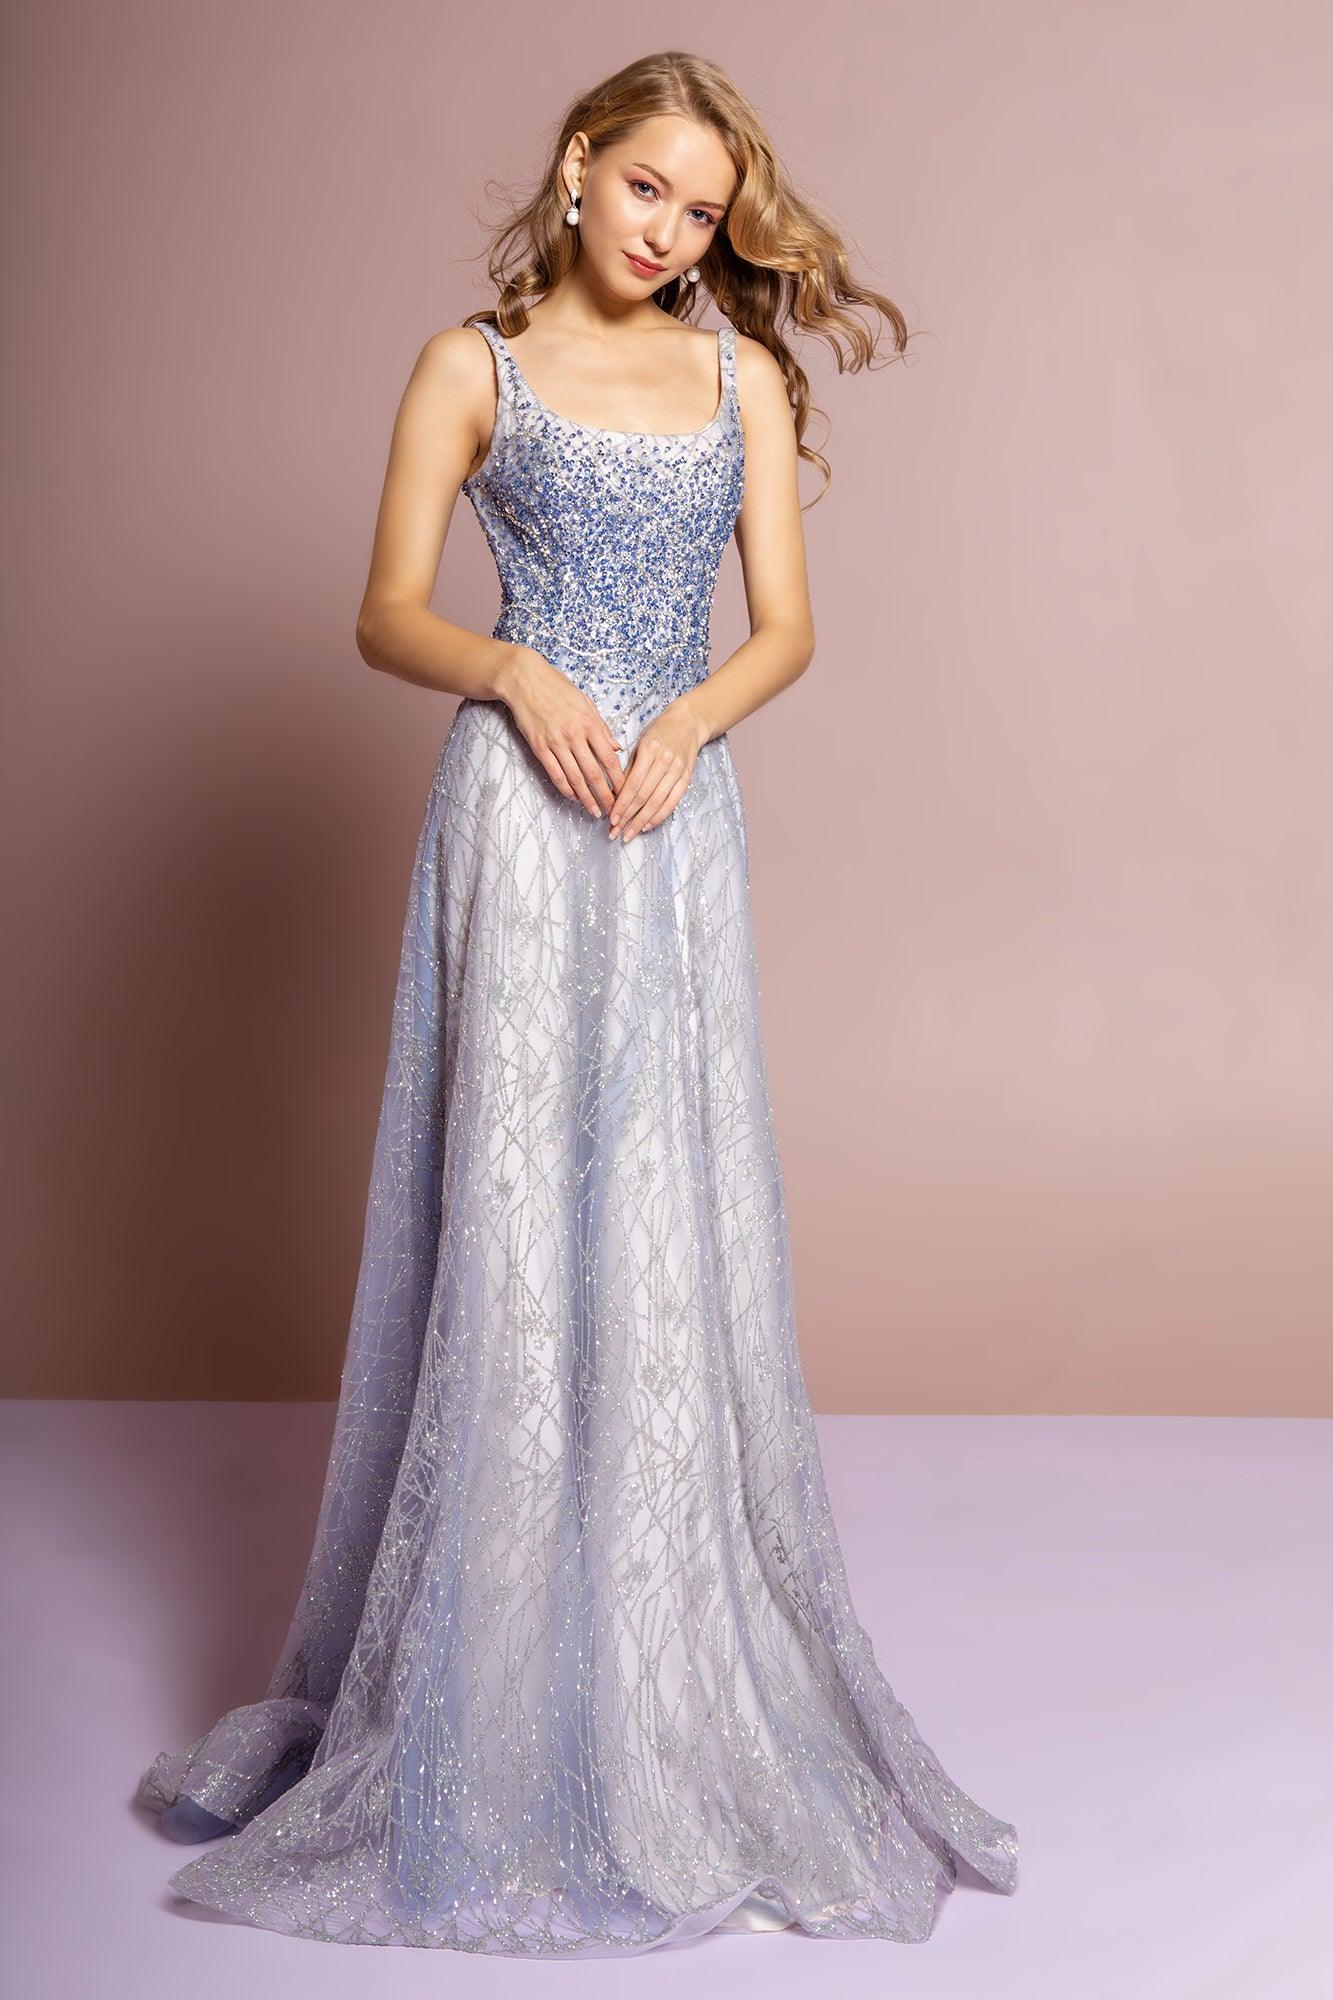 Sleeveless Long Prom Dress Evening Gown - The Dress Outlet Elizabeth K